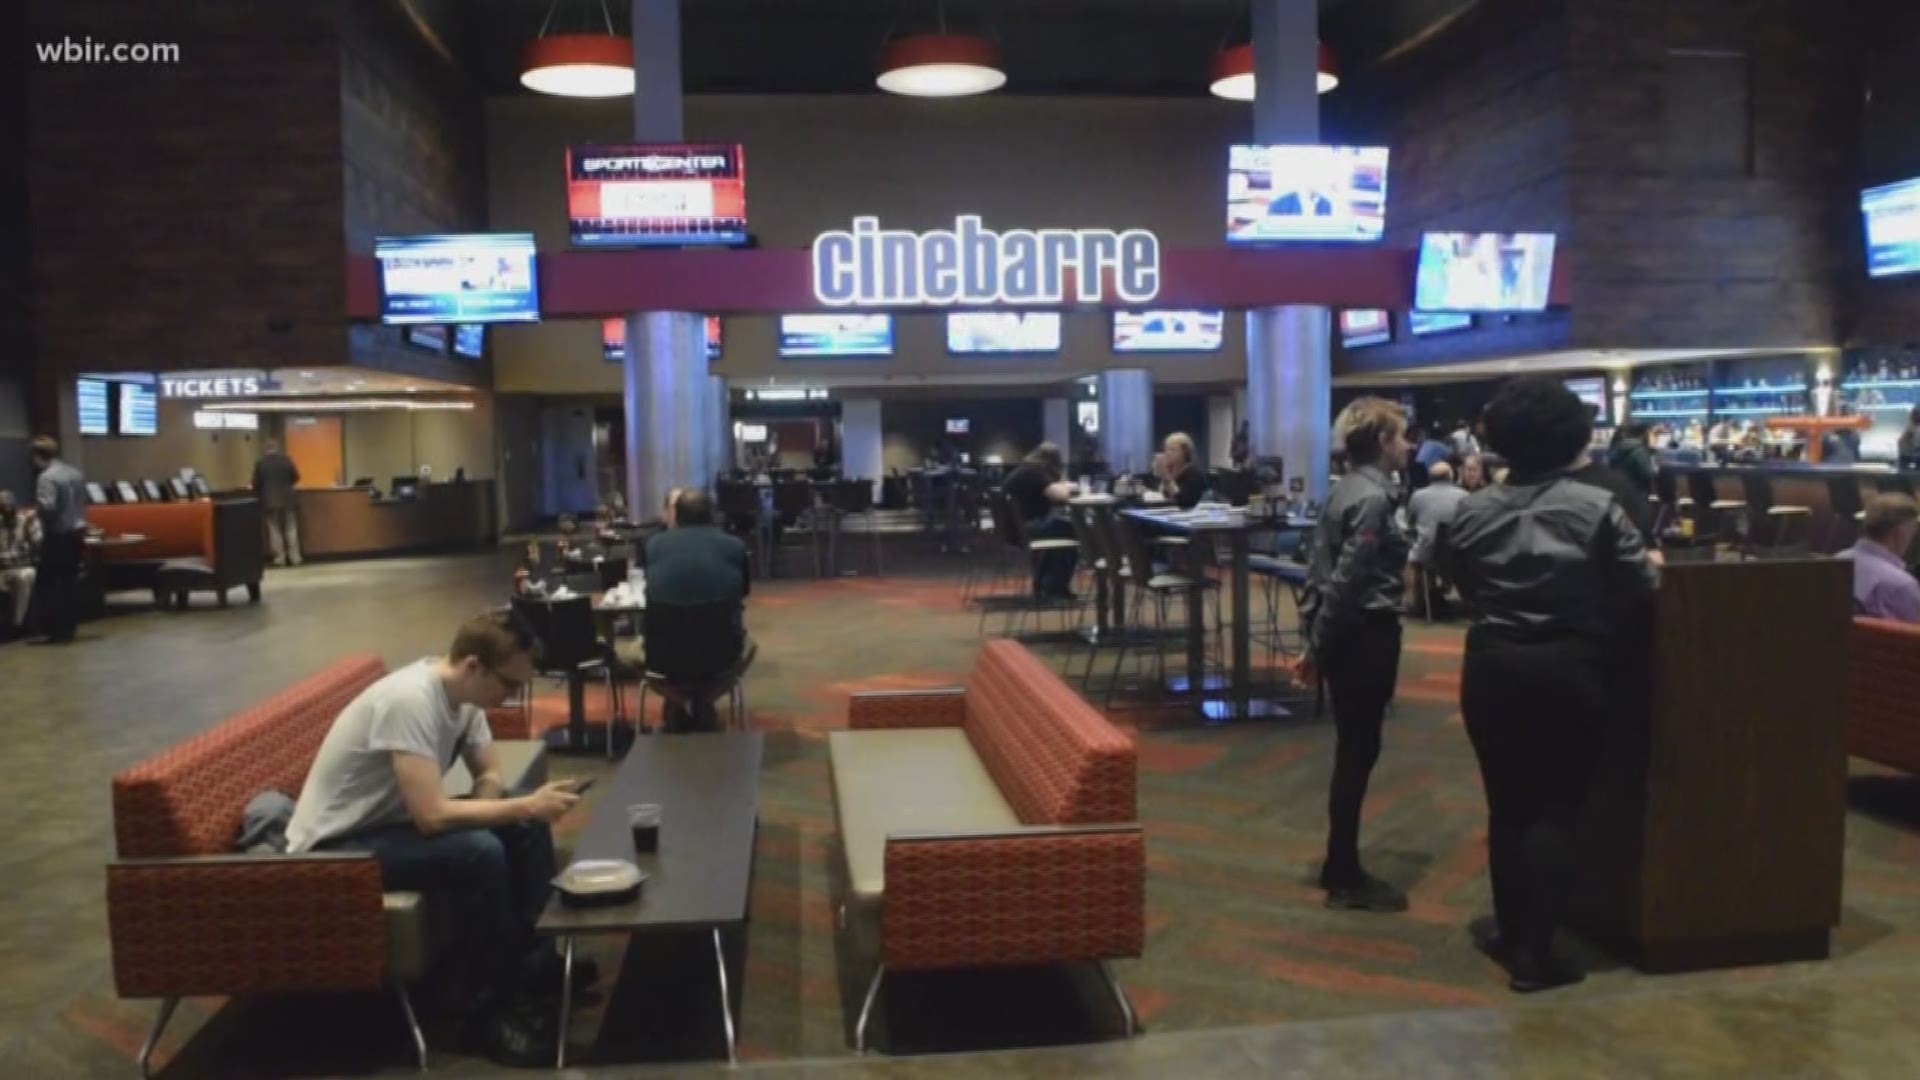 A new movie theater in Knoxville is aiming to attract people of all ages with a wide variety of activities.